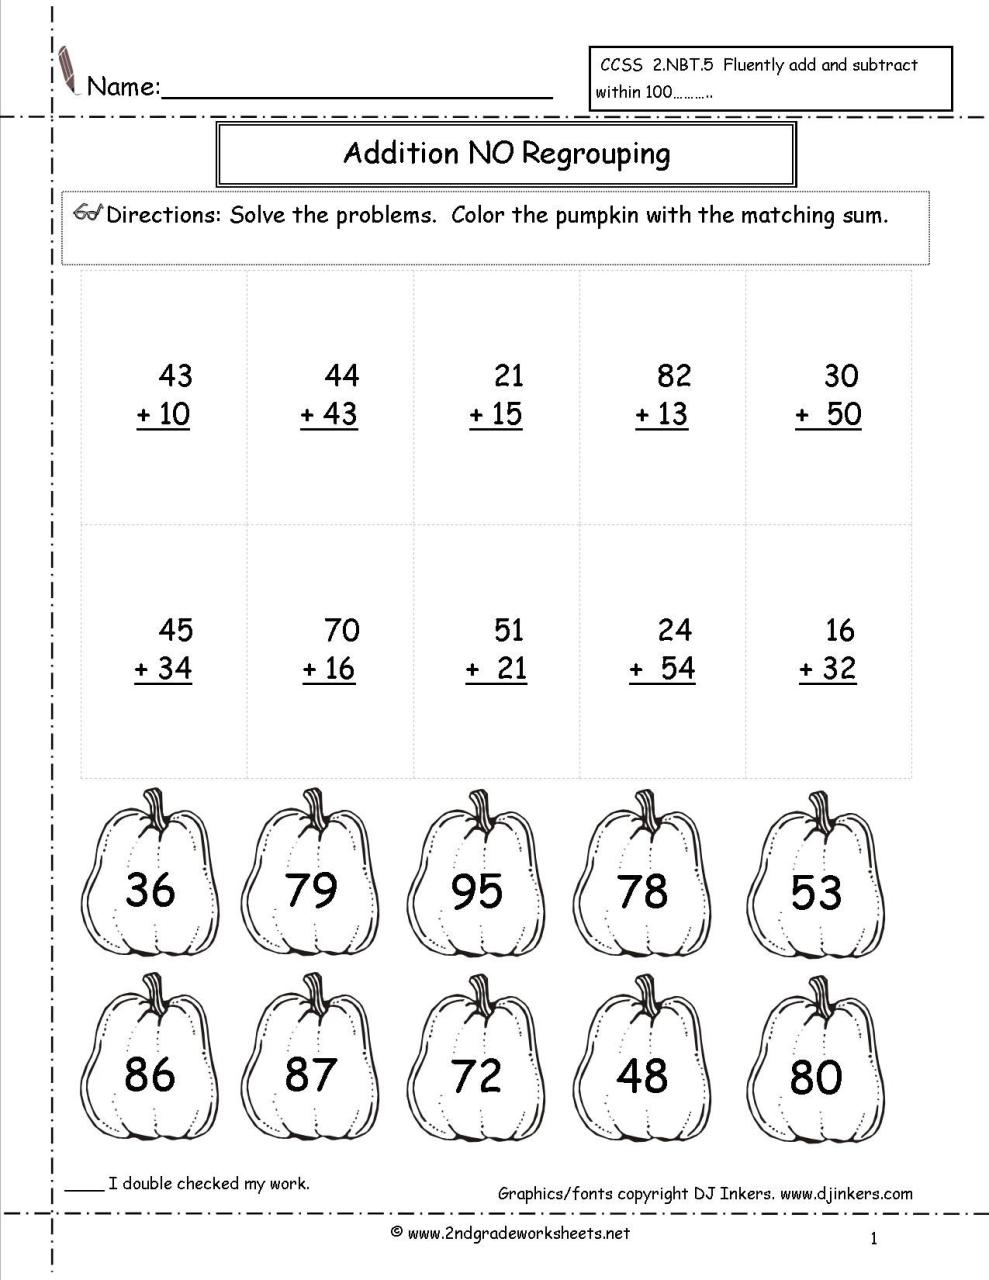 How To Teach Regrouping Addition To 2Nd Graders